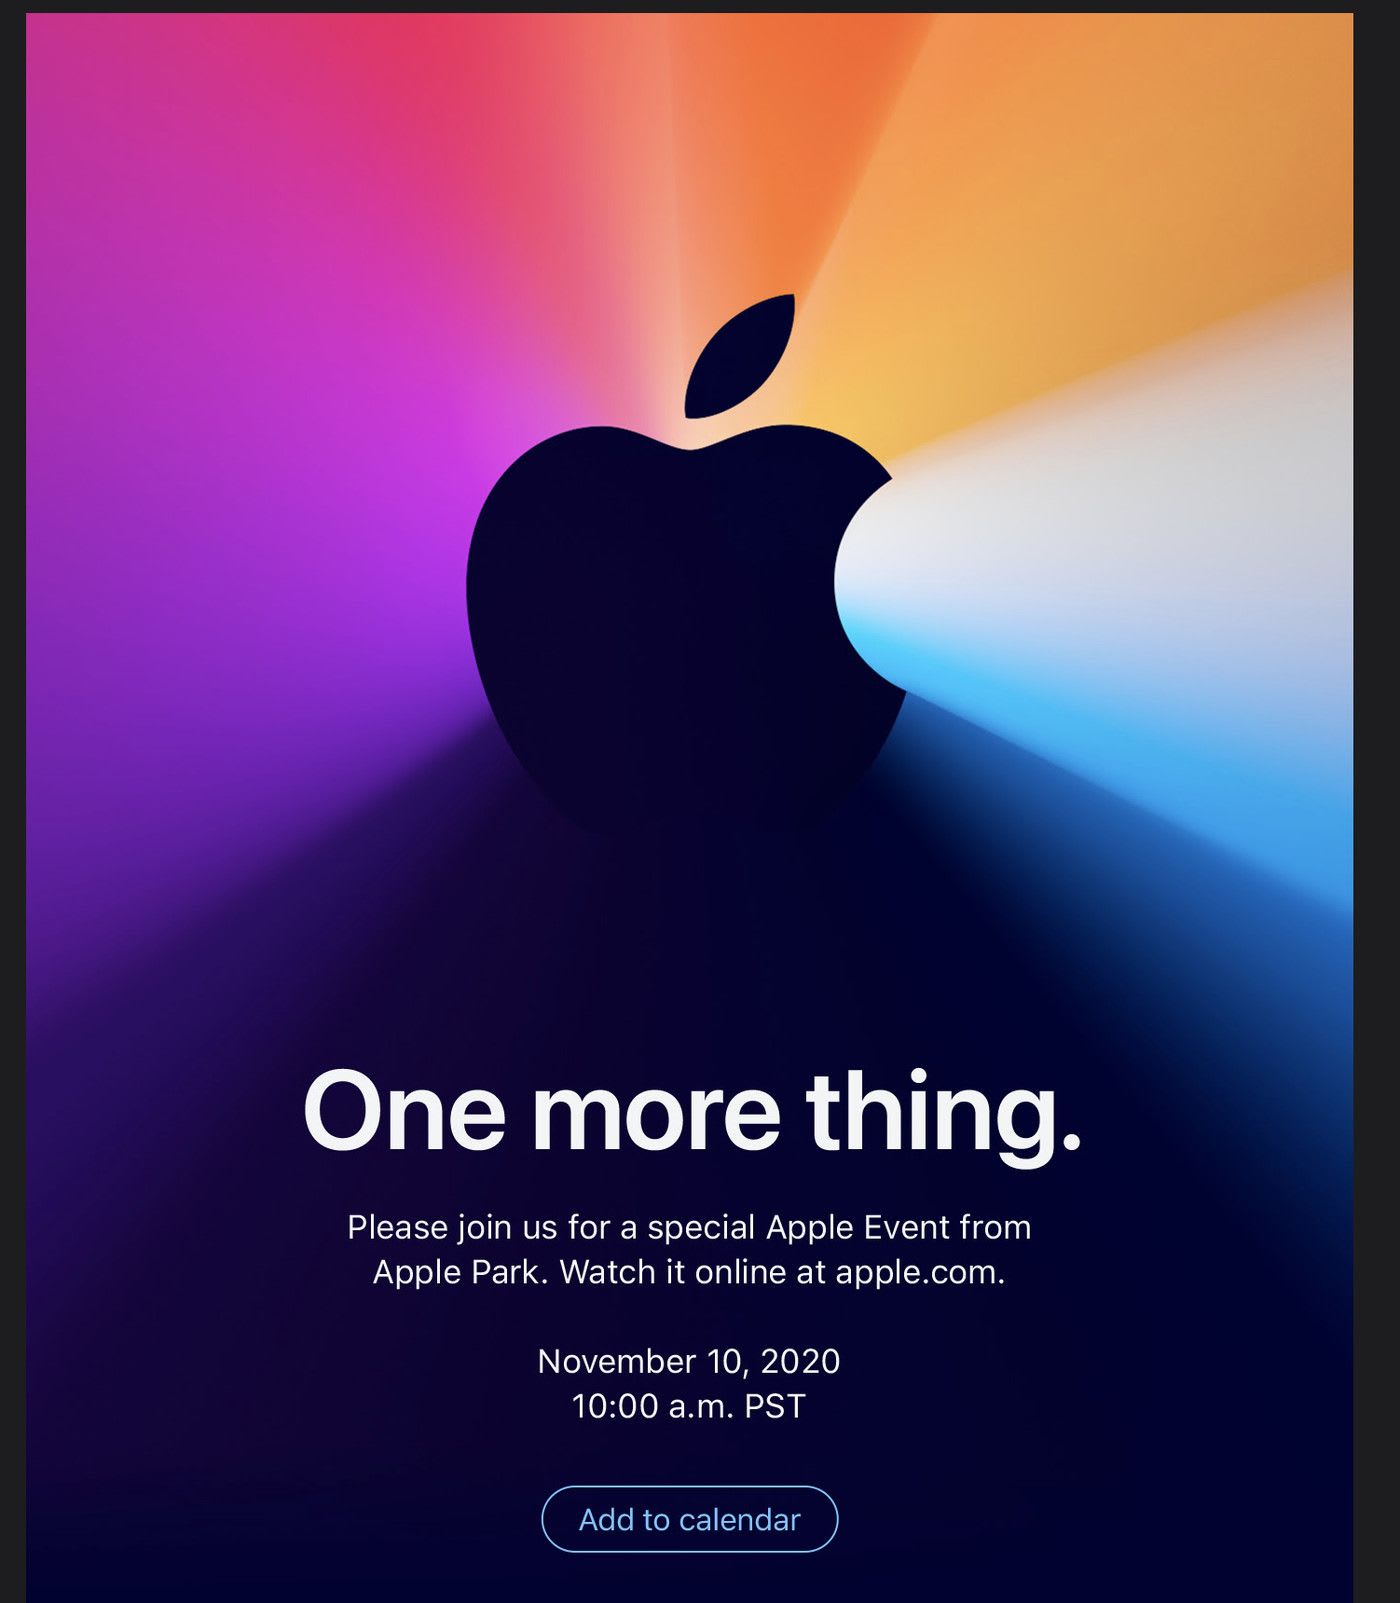 Apple announced ARM MacBook Event "One more thing."